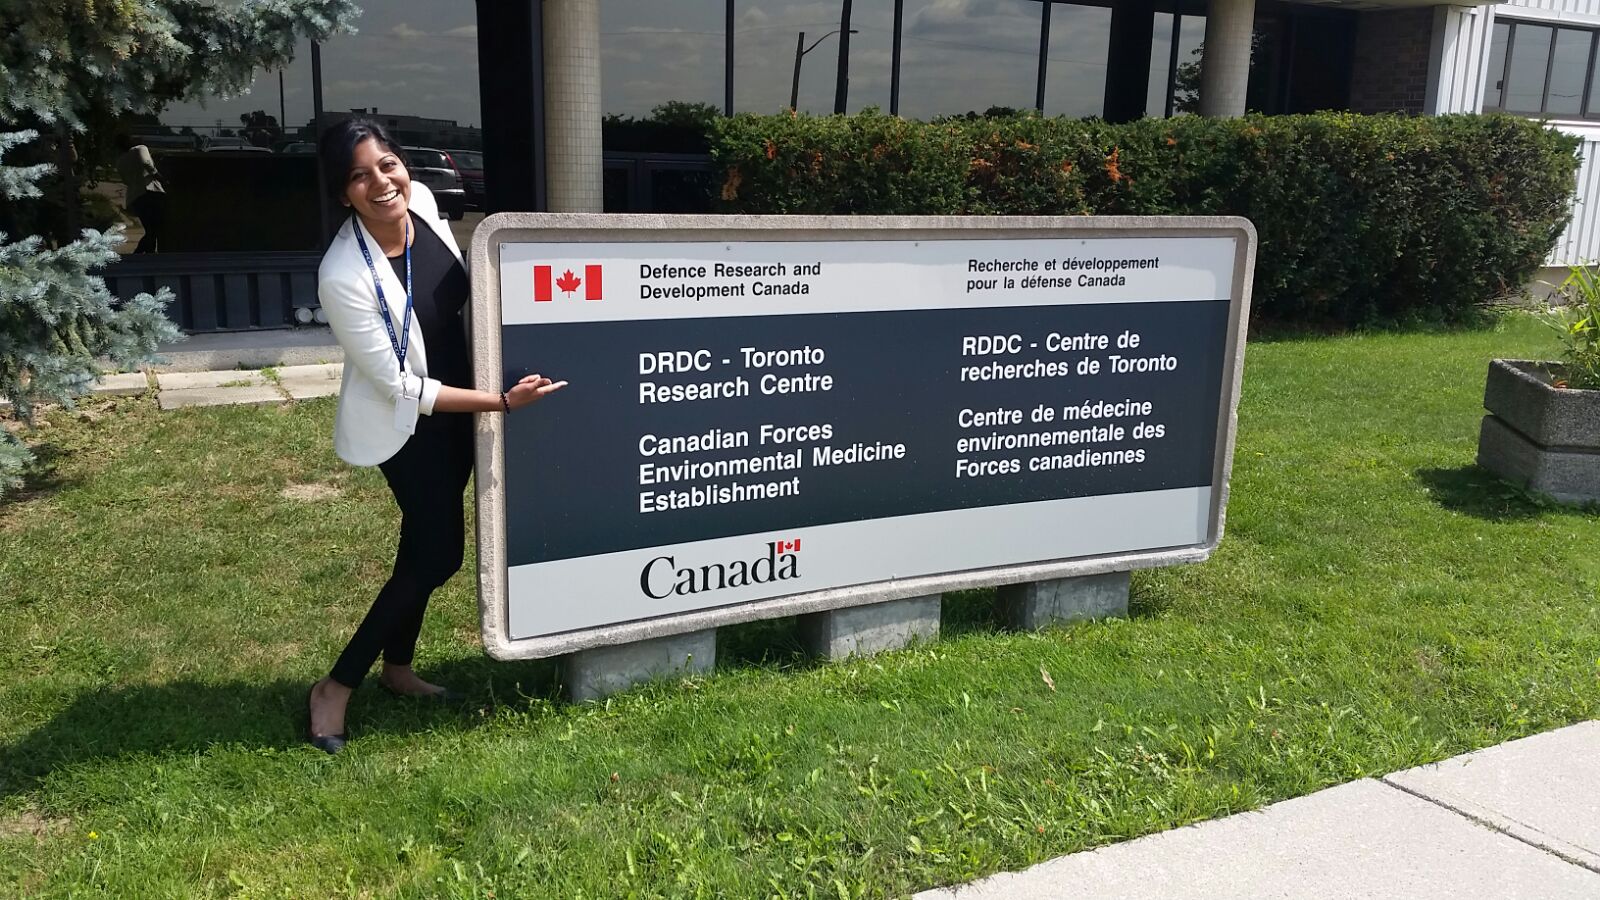 Janani at the DRDC Toronto Research Centre